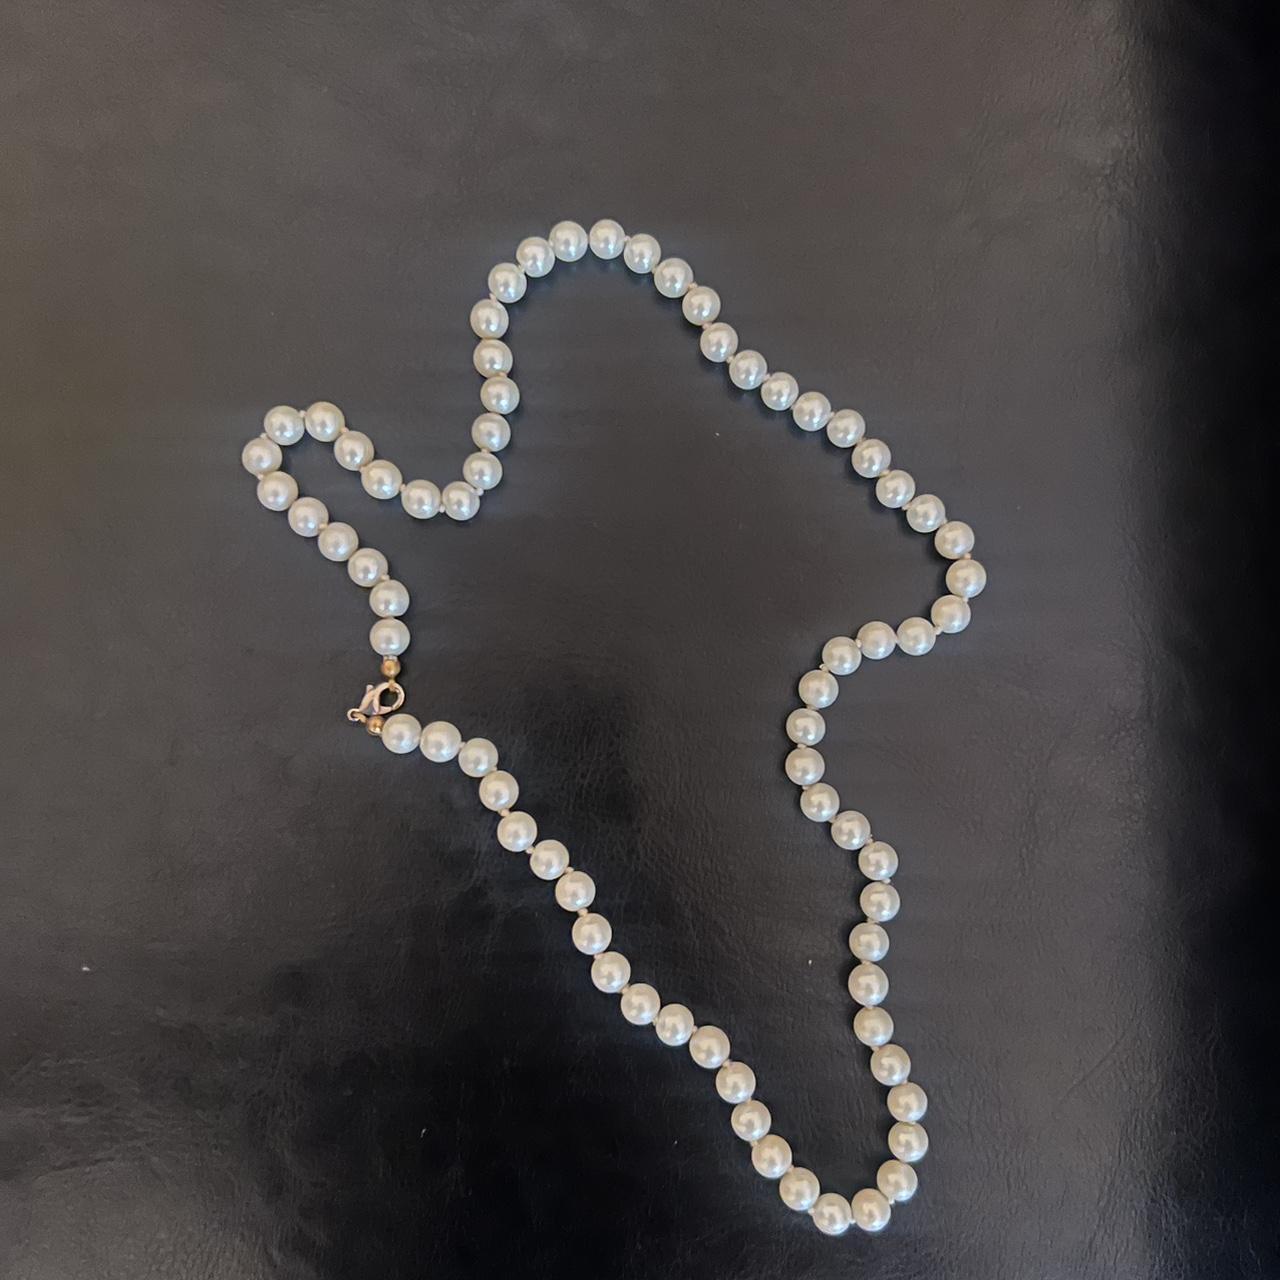 Genuine 7-8mm Natural White Freshwater Cultured Pearl Necklace 20 inch |  eBay